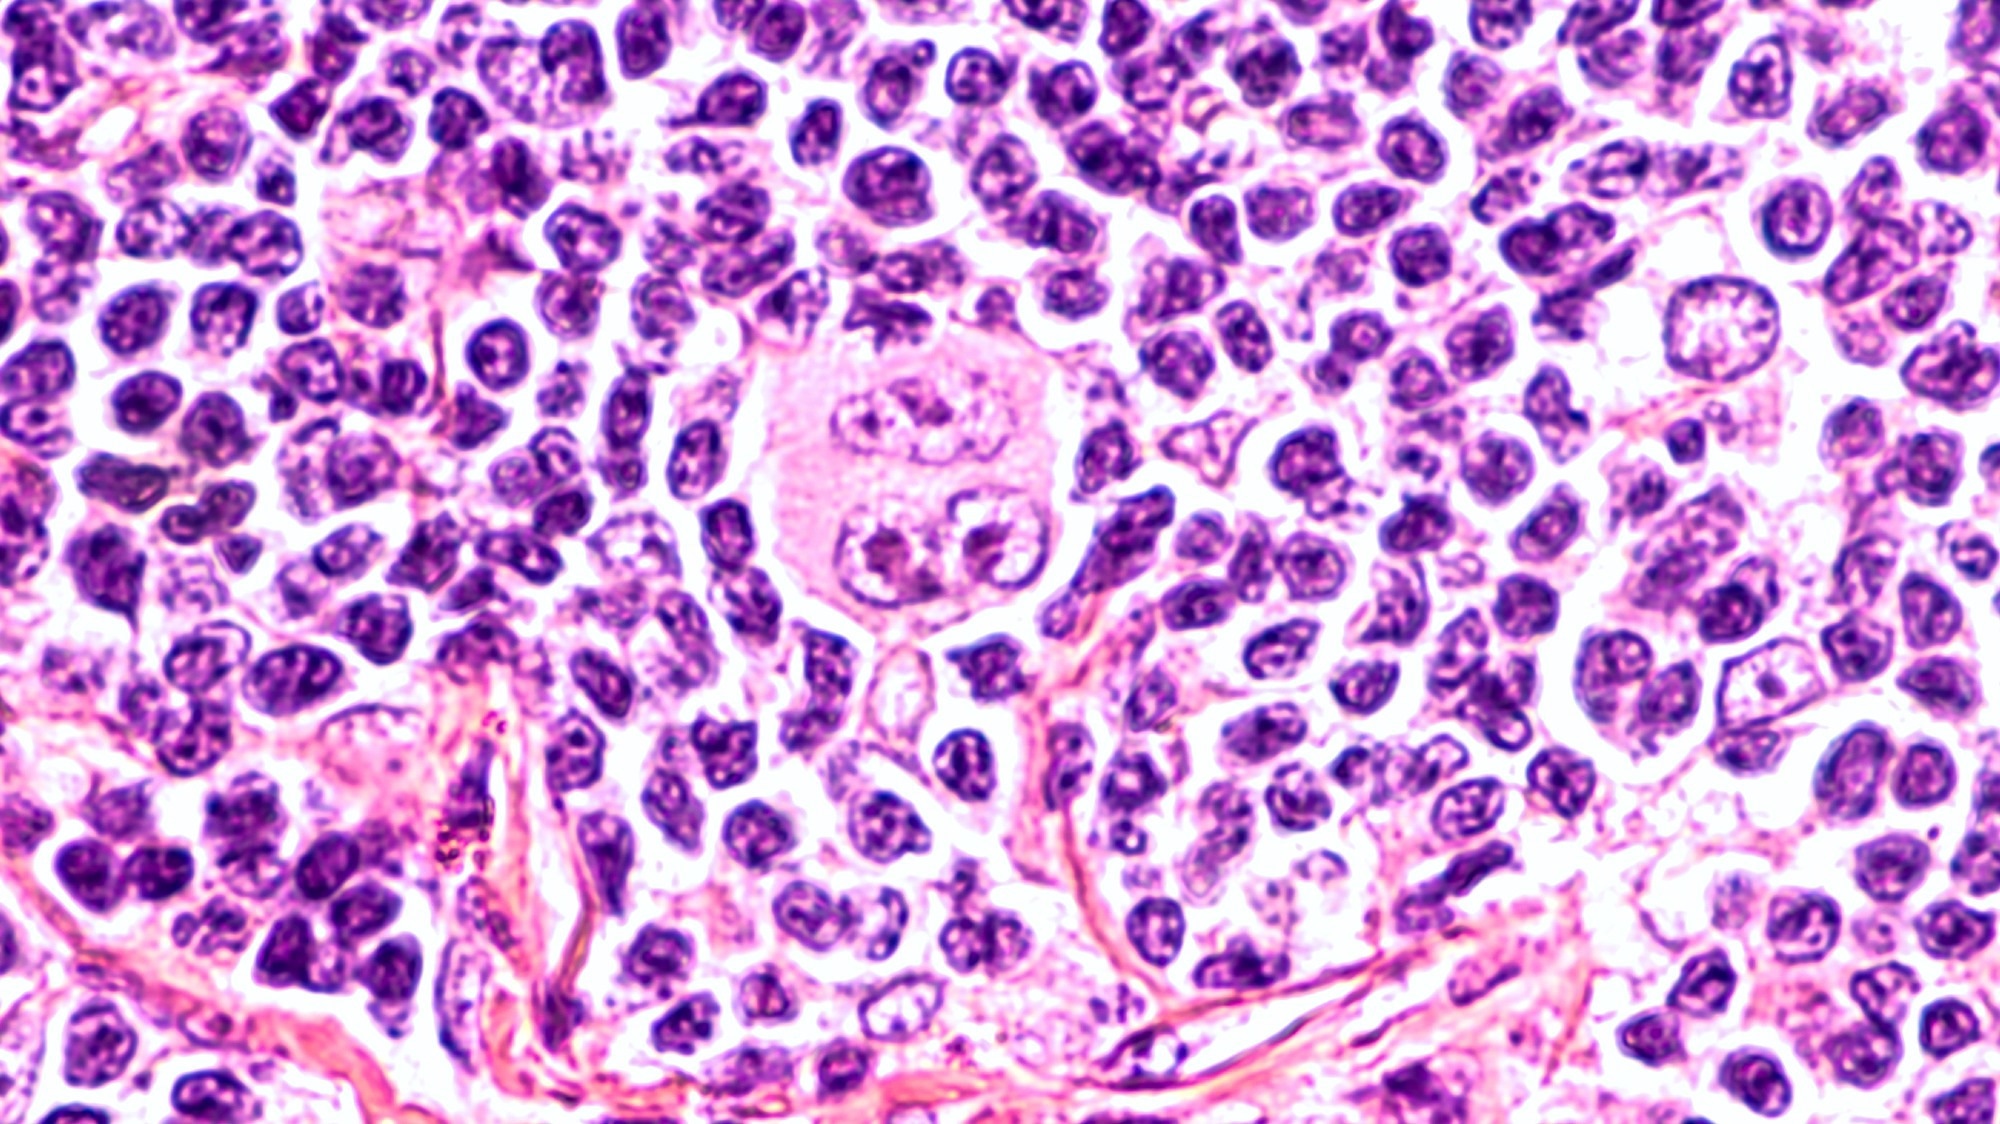 Photomicrograph of a lymph node in a patient with Hodgkin